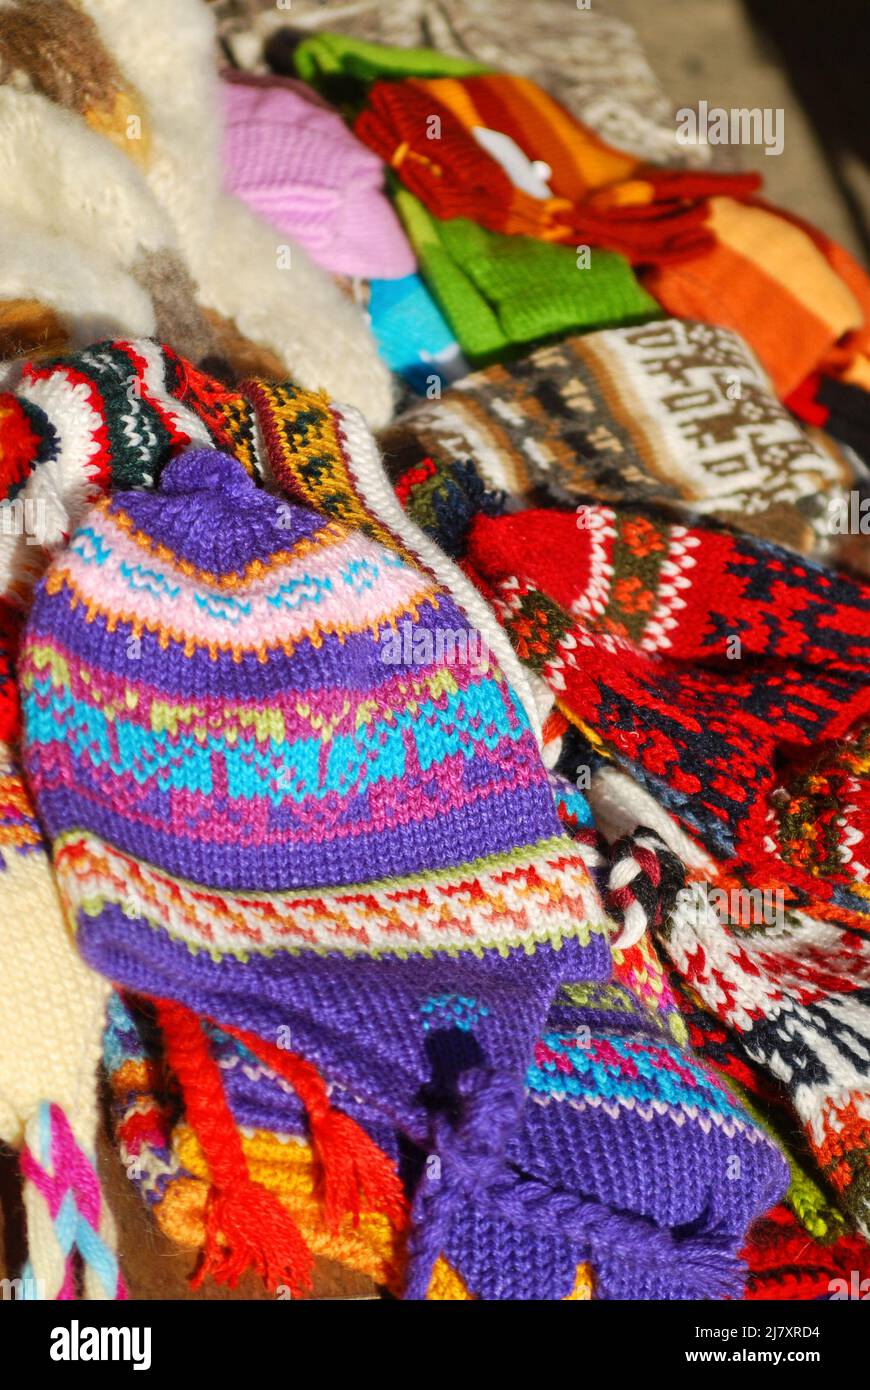 Group of colorful Chilean snow caps for sale at Chiloe market. Stock Photo